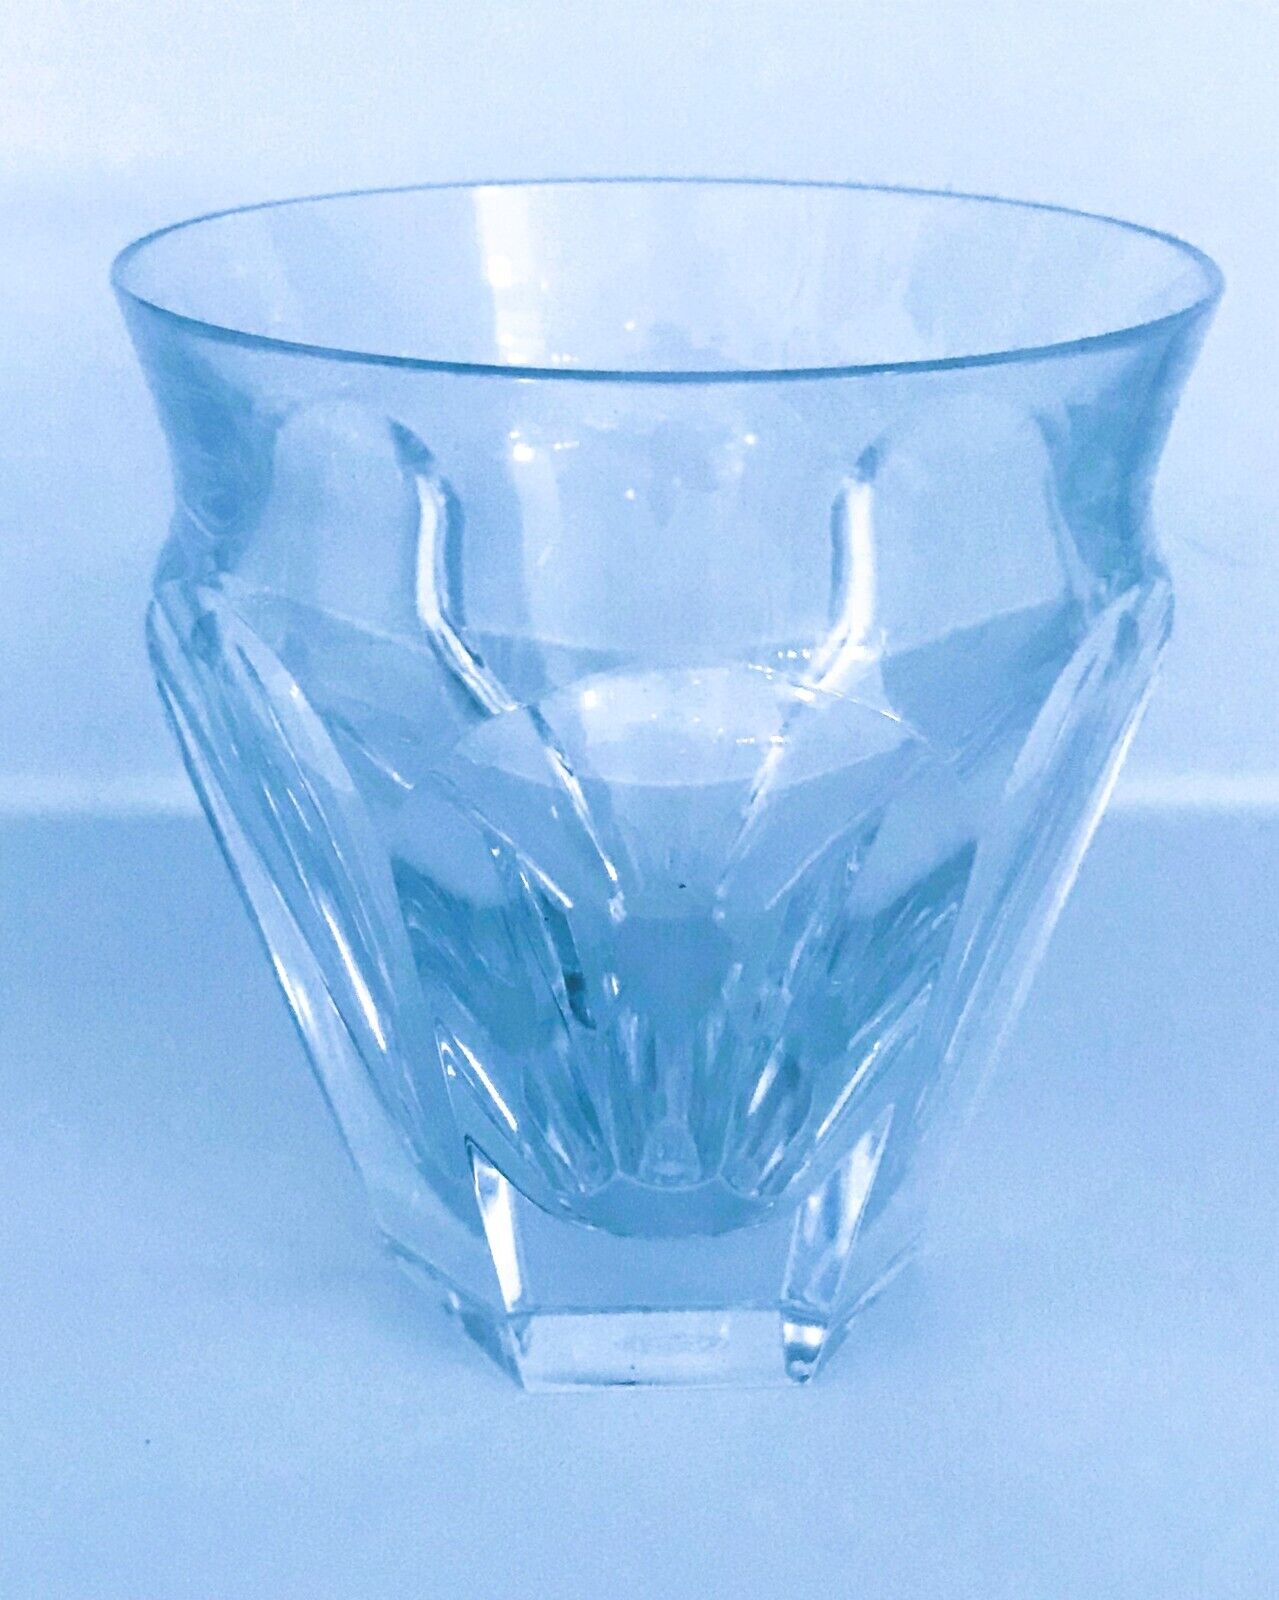  Baccarat Crystal Glasses, from their Harcourt Tallyrand Line - Set of 4  